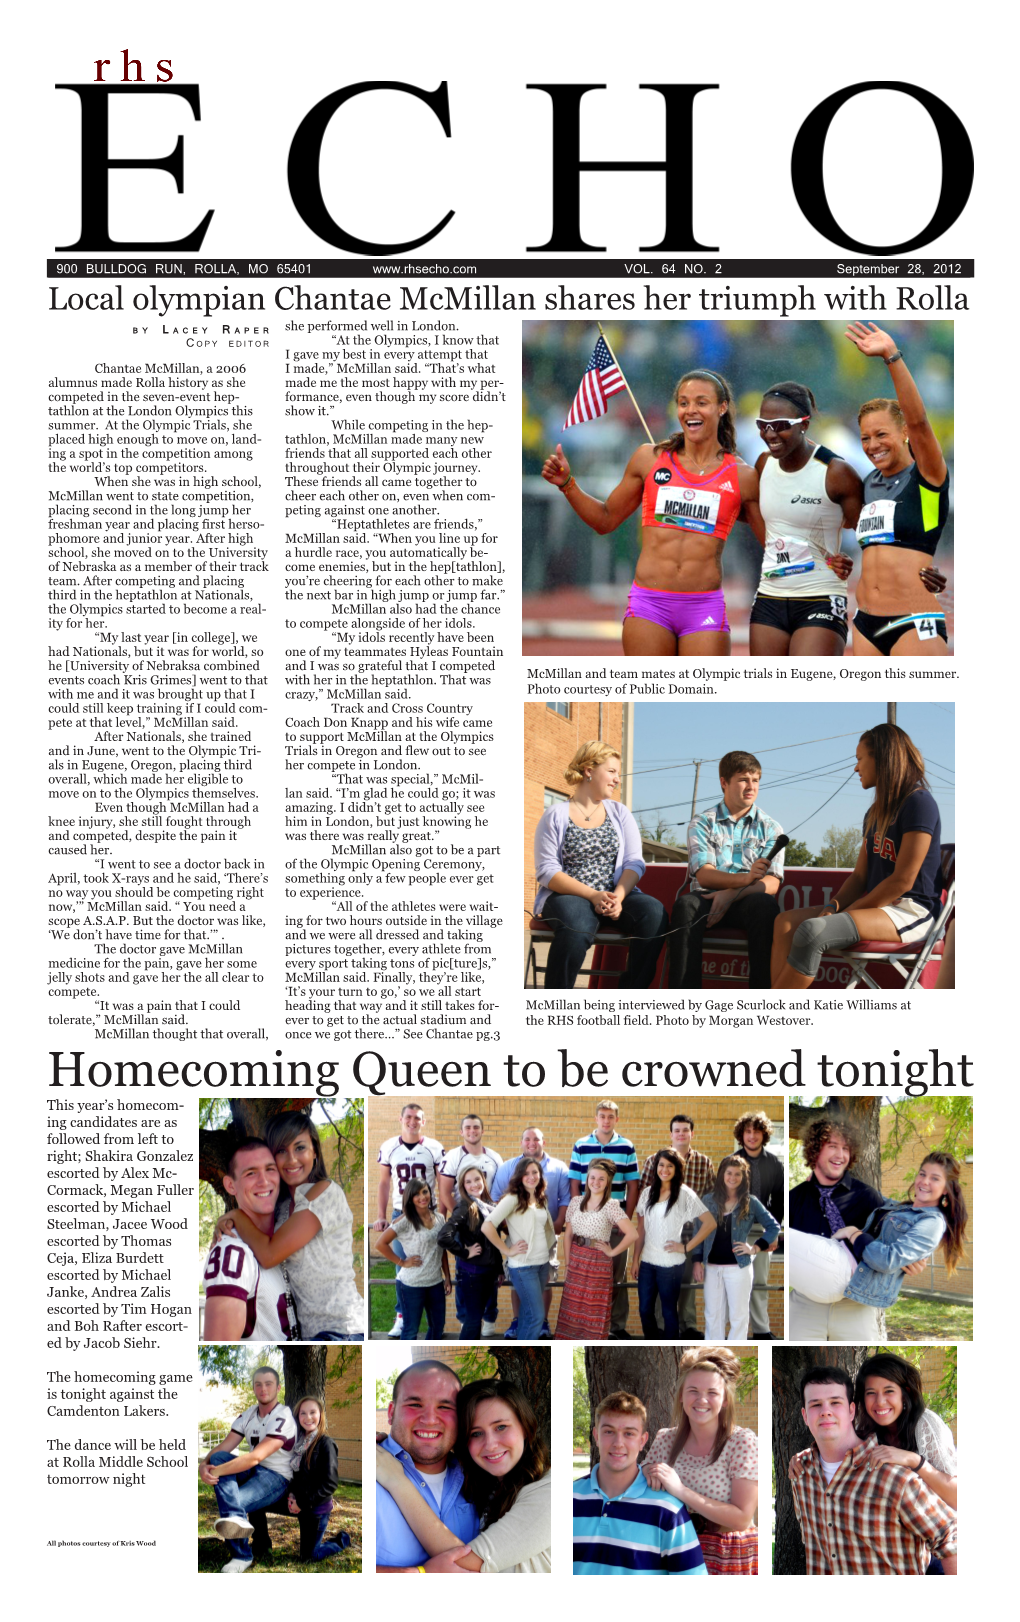 Homecoming Queen to Be Crowned Tonight